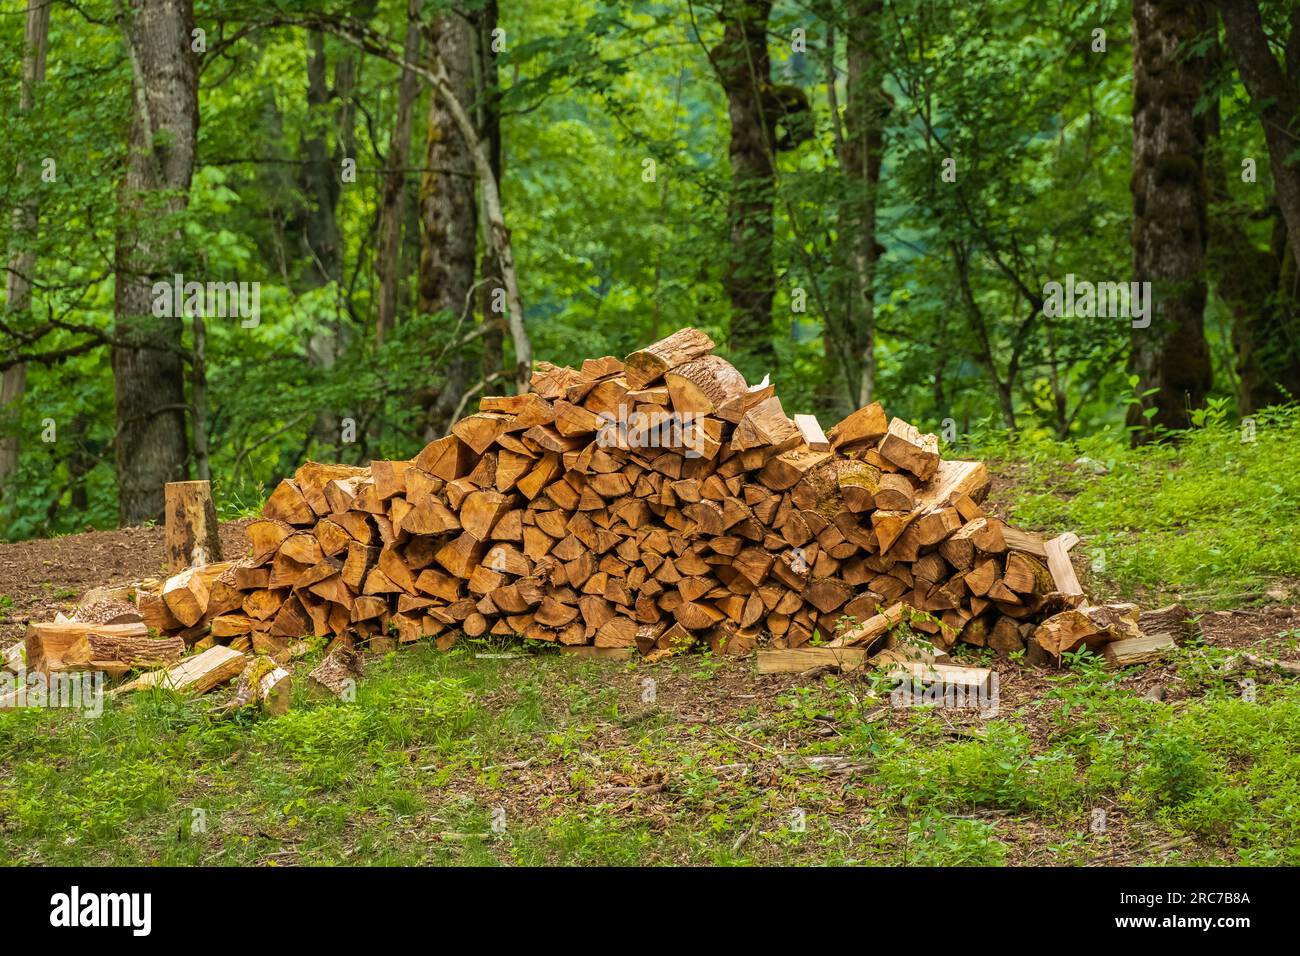 A pile of stacked firewood, prepared for heating the house, Firewood harvested for heating in winter, Chopped firewood on a stack, Firewood stacked an Stock Photo